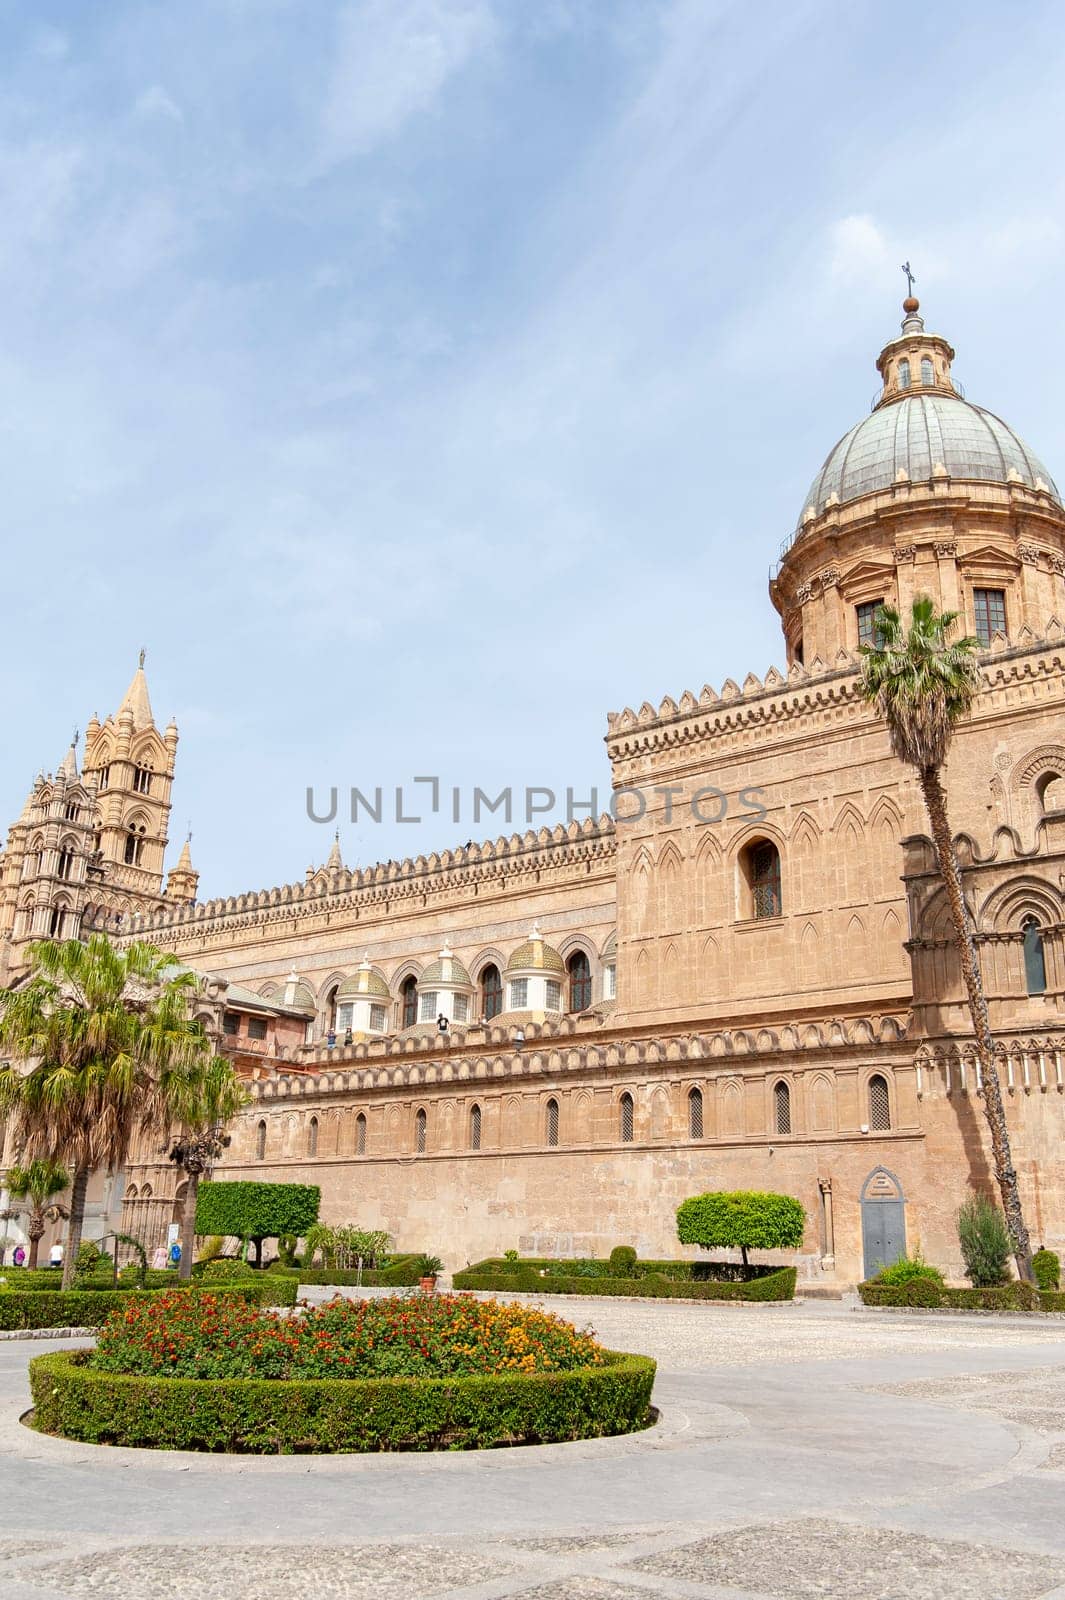 The Primatial Metropolitan Cathedral Basilica of the Holy Virgin Mary of the Assumption, known as the Cathedral of Palermo, Sicily, Italy